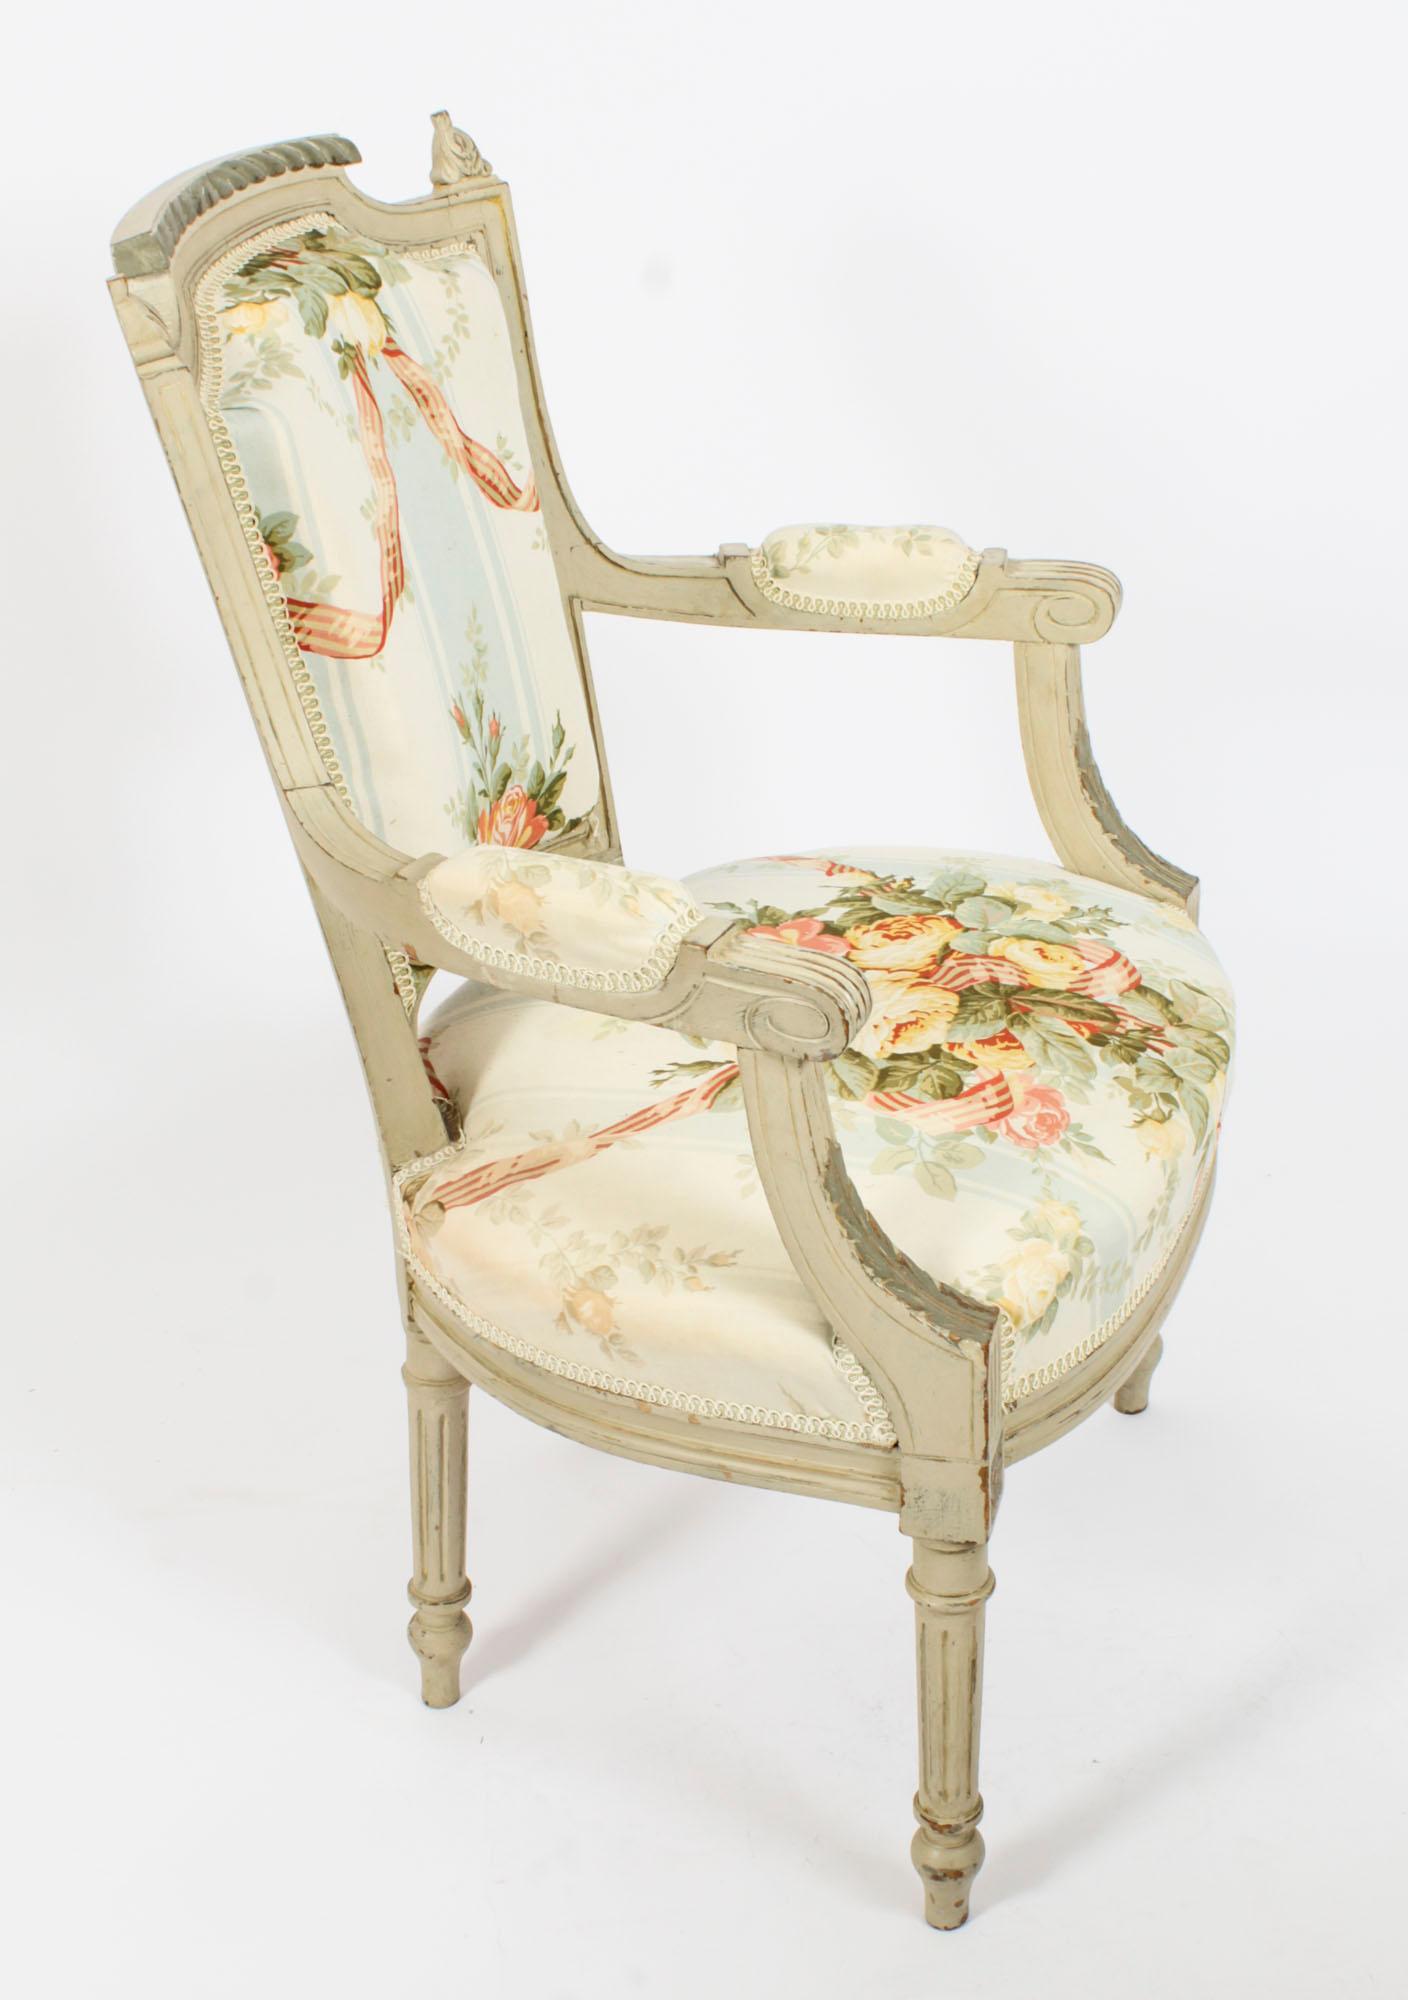 Antique Pair French Louis XVI Revival Painted Fauteuil Armchairs, 19th Century For Sale 9